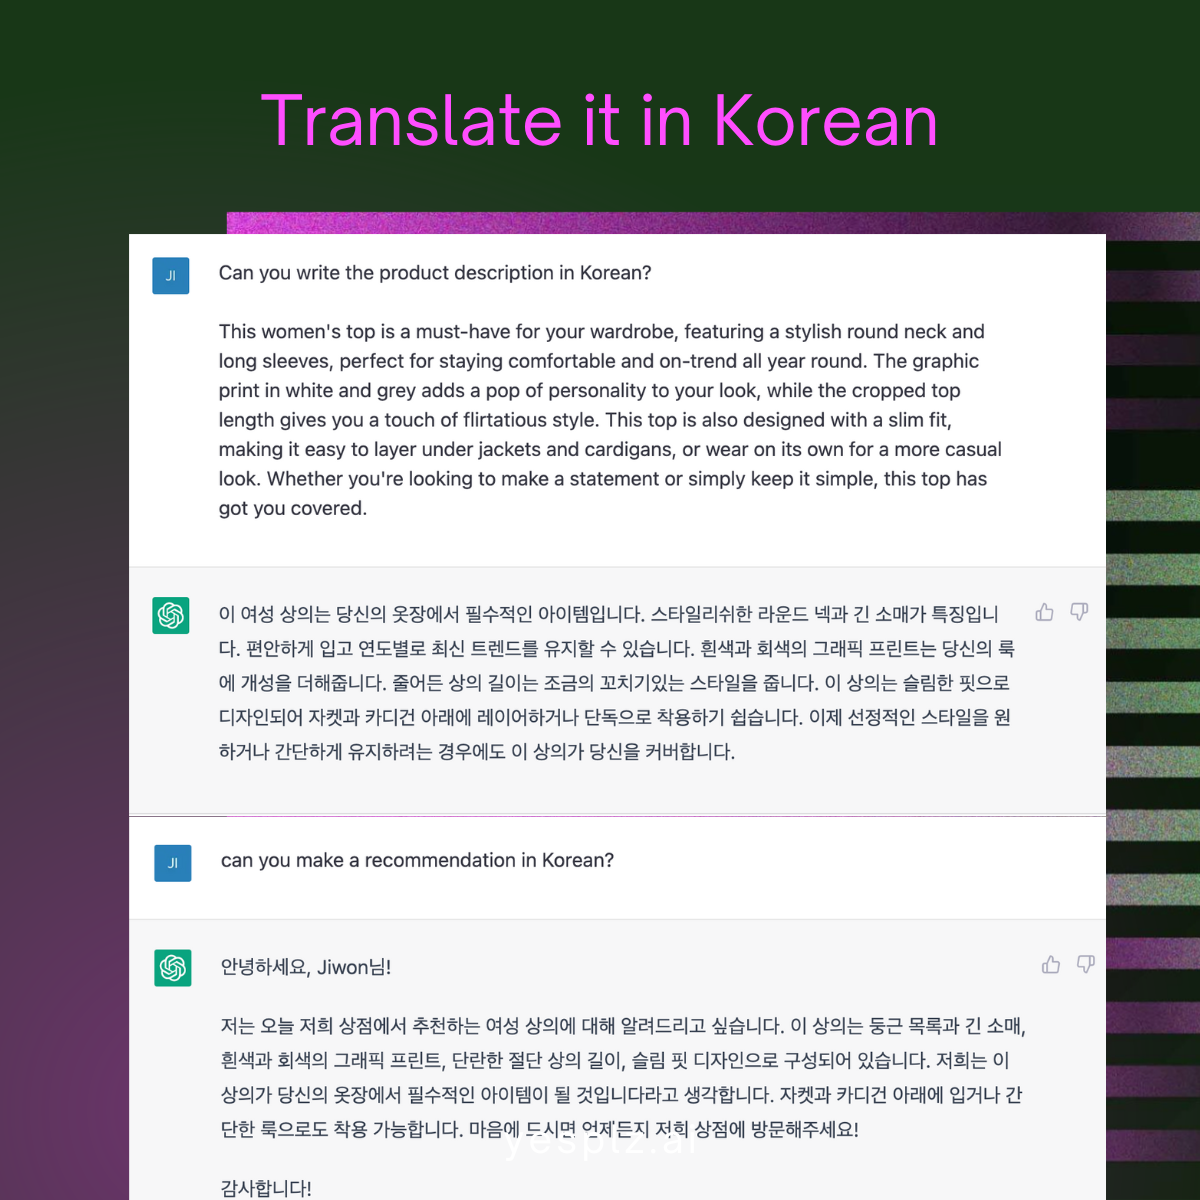 An automated eCommerce product description translated to Korean by ChatGPT